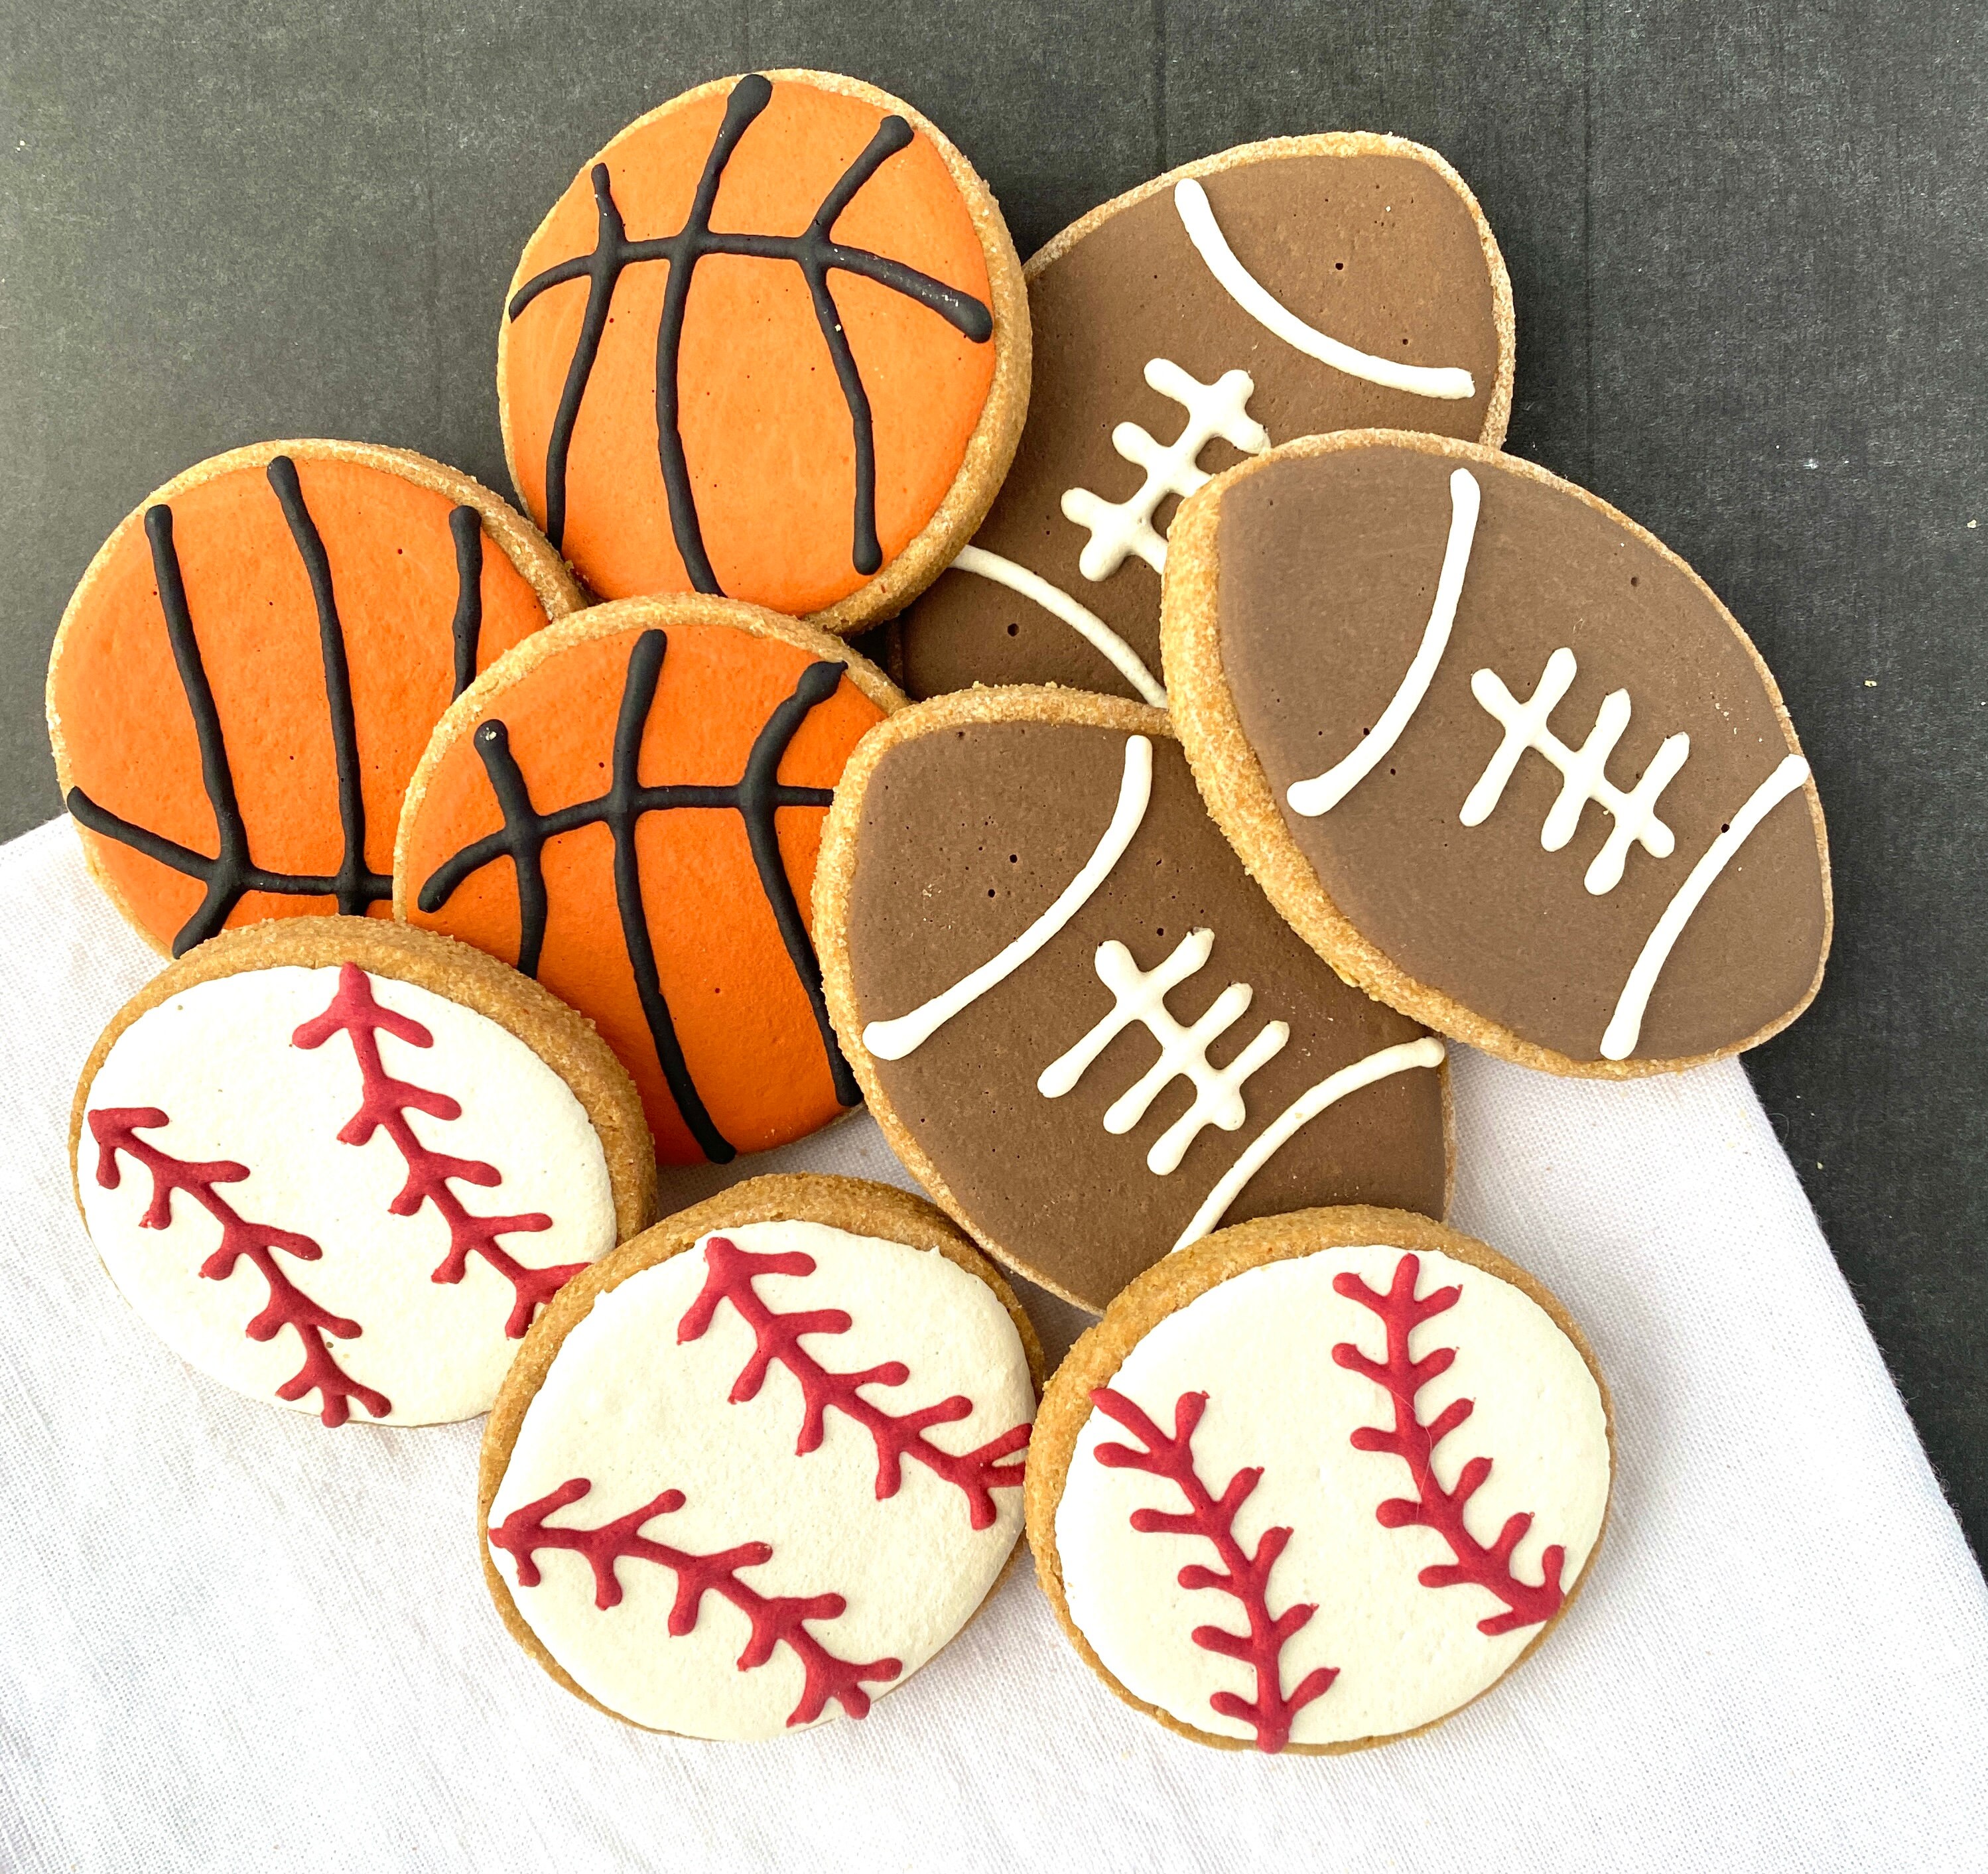 Pets First MLB Philadelphia Phillies Baseball Dog Treats, Delicious Cookies  for Dogs, Baseball Reward for the Sporty PUP